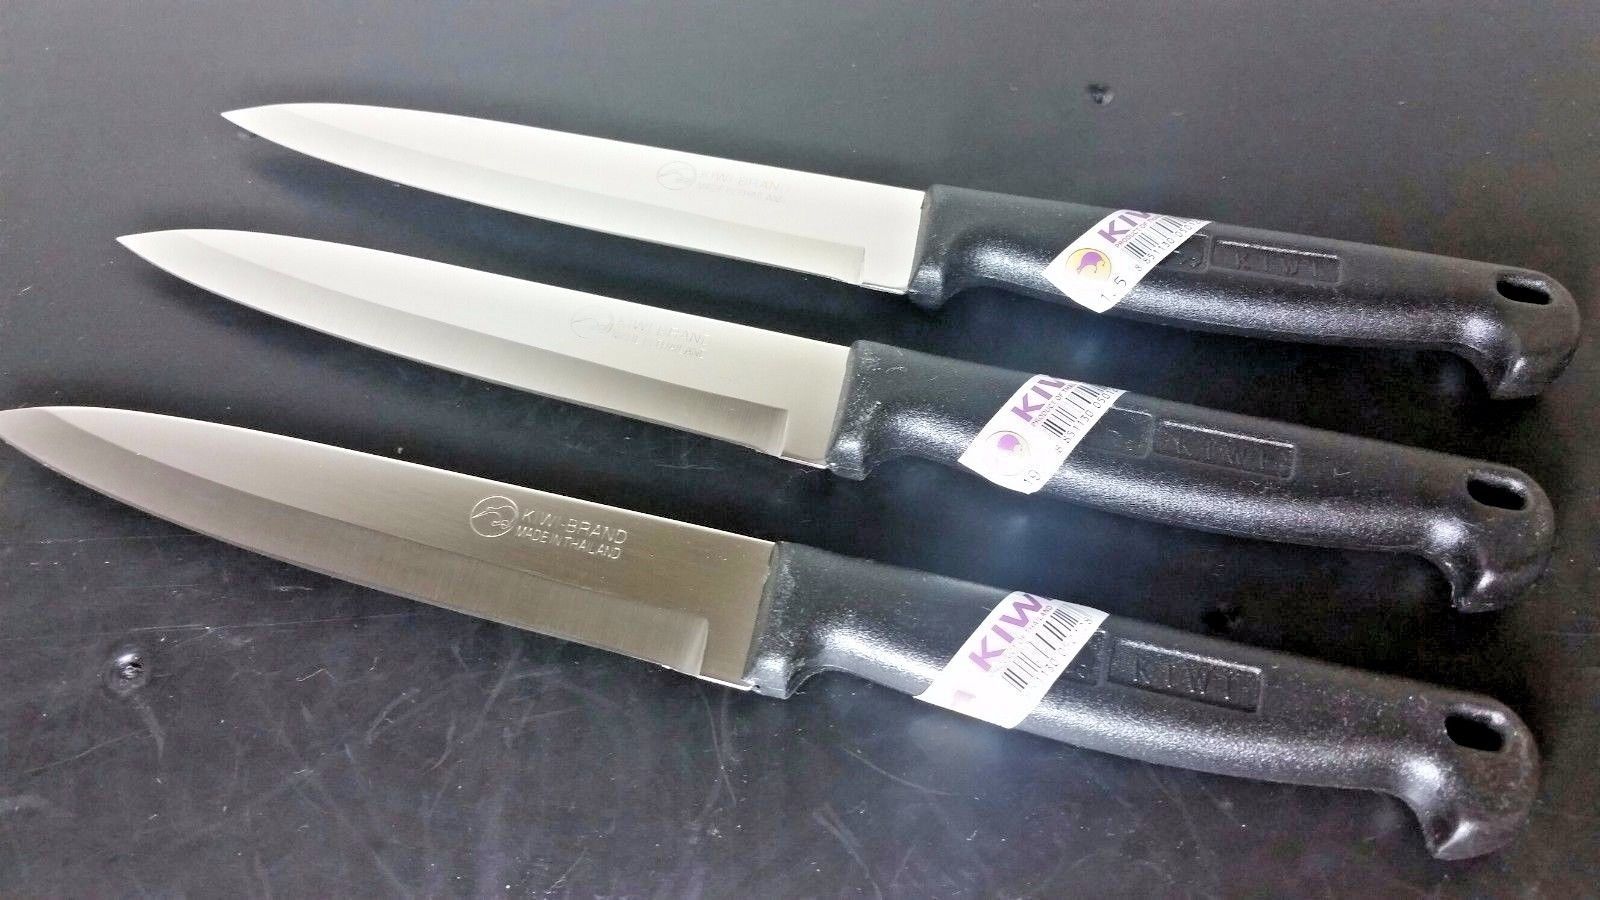  Kiwi Knife Cook Utility Knives Cutlery Steak Wood Handle  Kitchen Tool Sharp Blade 6.5 Stainless Steel 1 set (2 Pcs) (No.171,172):  Home & Kitchen